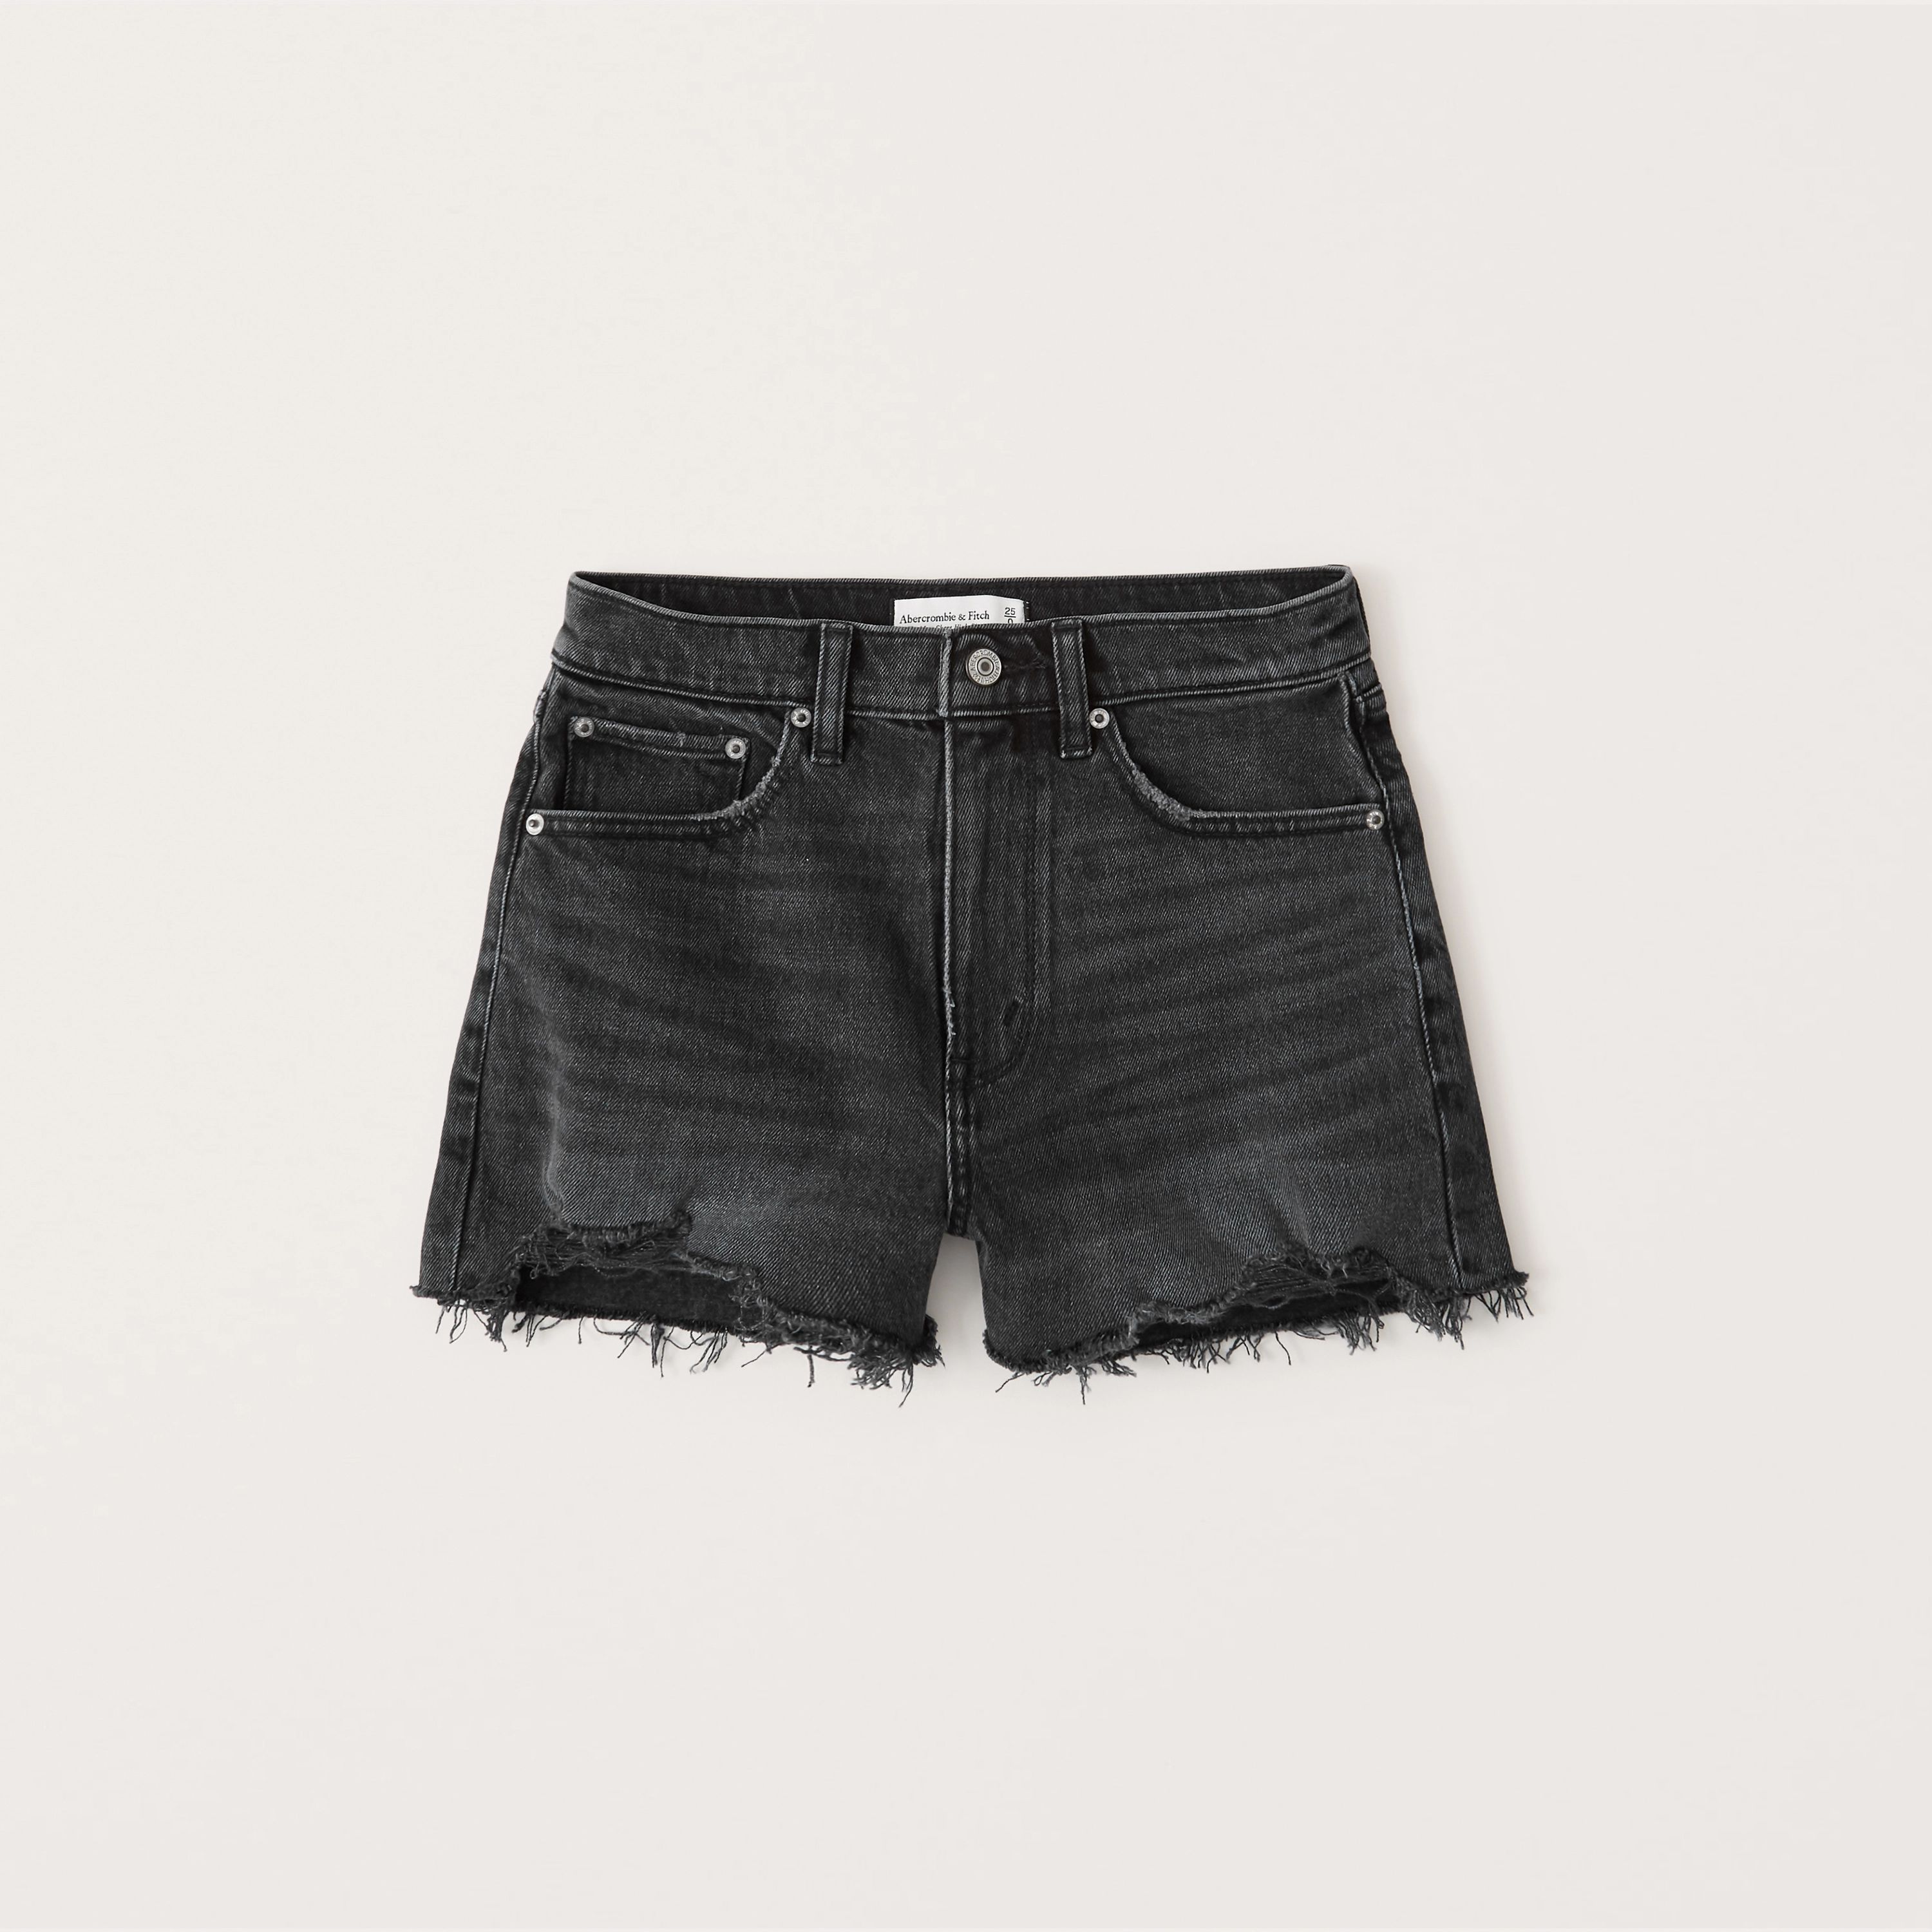 A&F Vintage Stretch Denim
			


  
						
							High Rise Mom Shorts
						
					



		
	



	
	... | Abercrombie & Fitch (US)